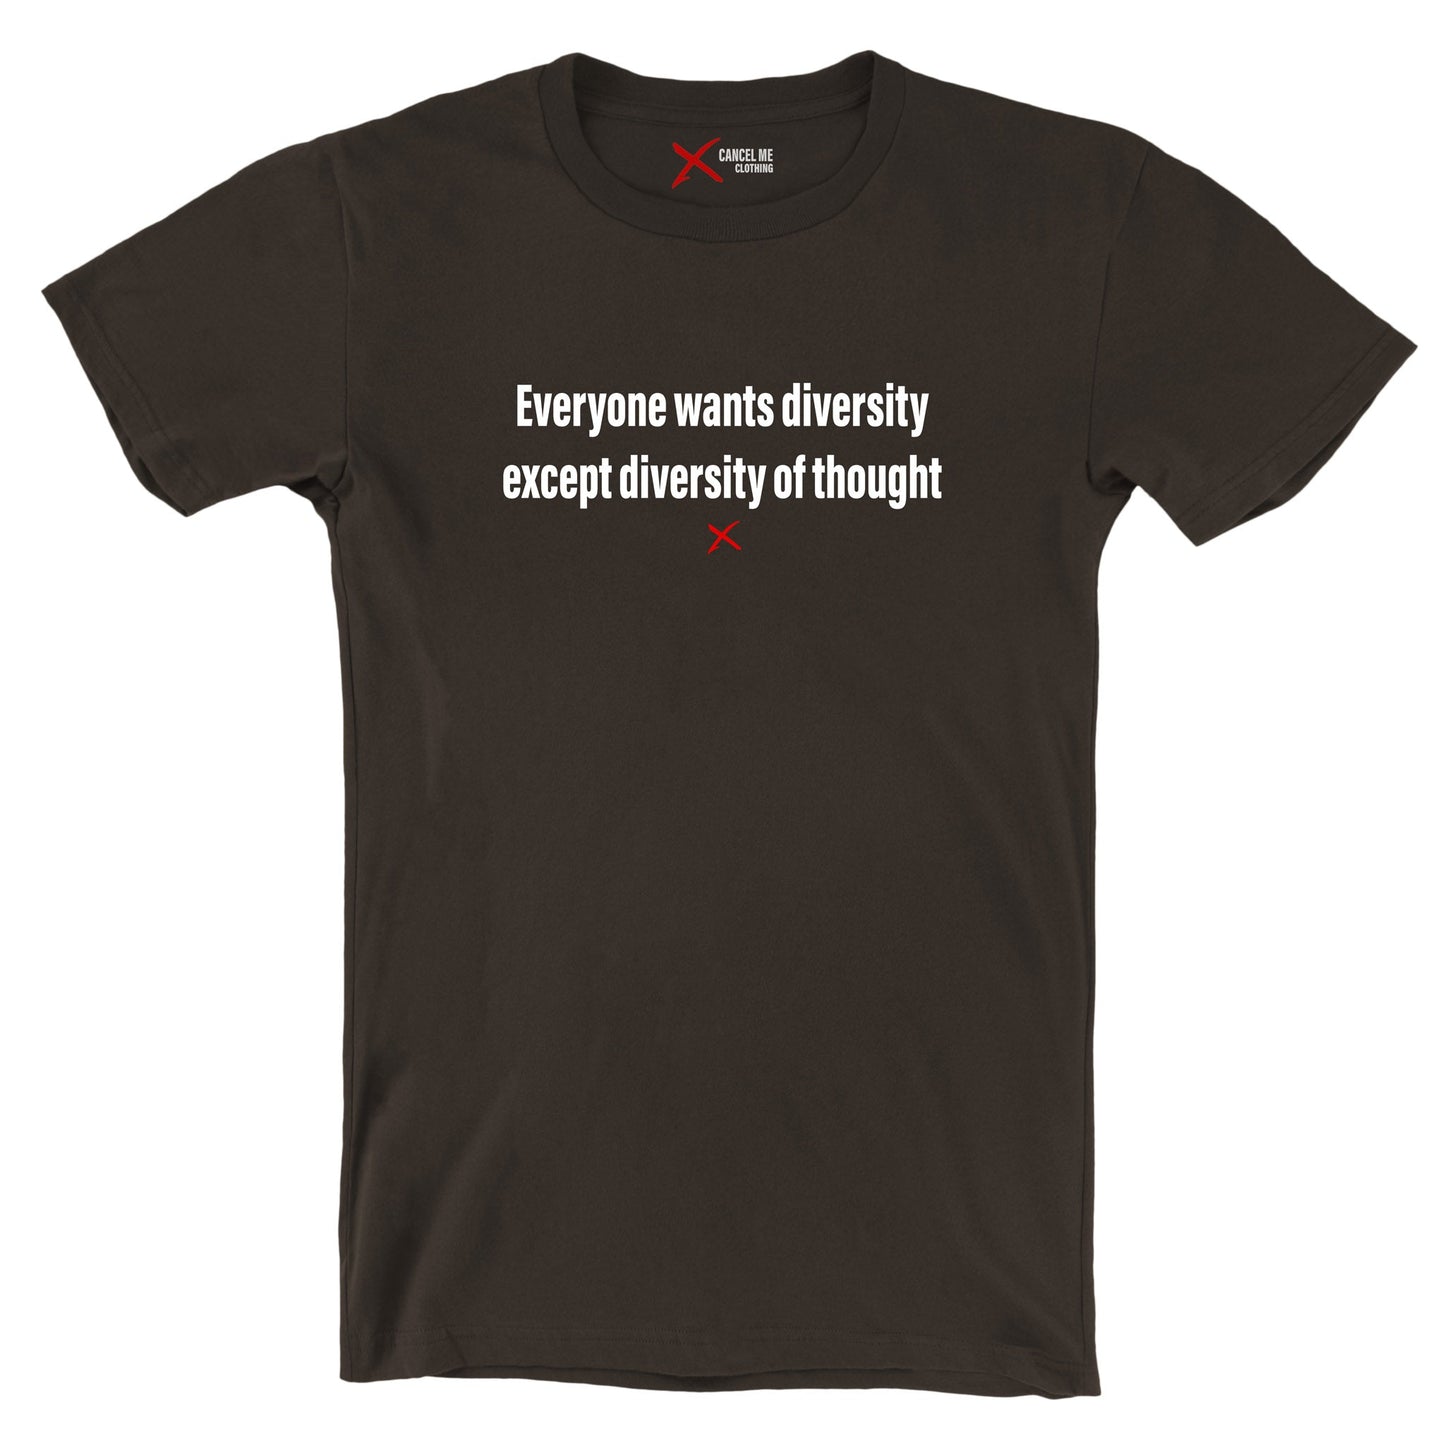 Everyone wants diversity except diversity of thought - Shirt